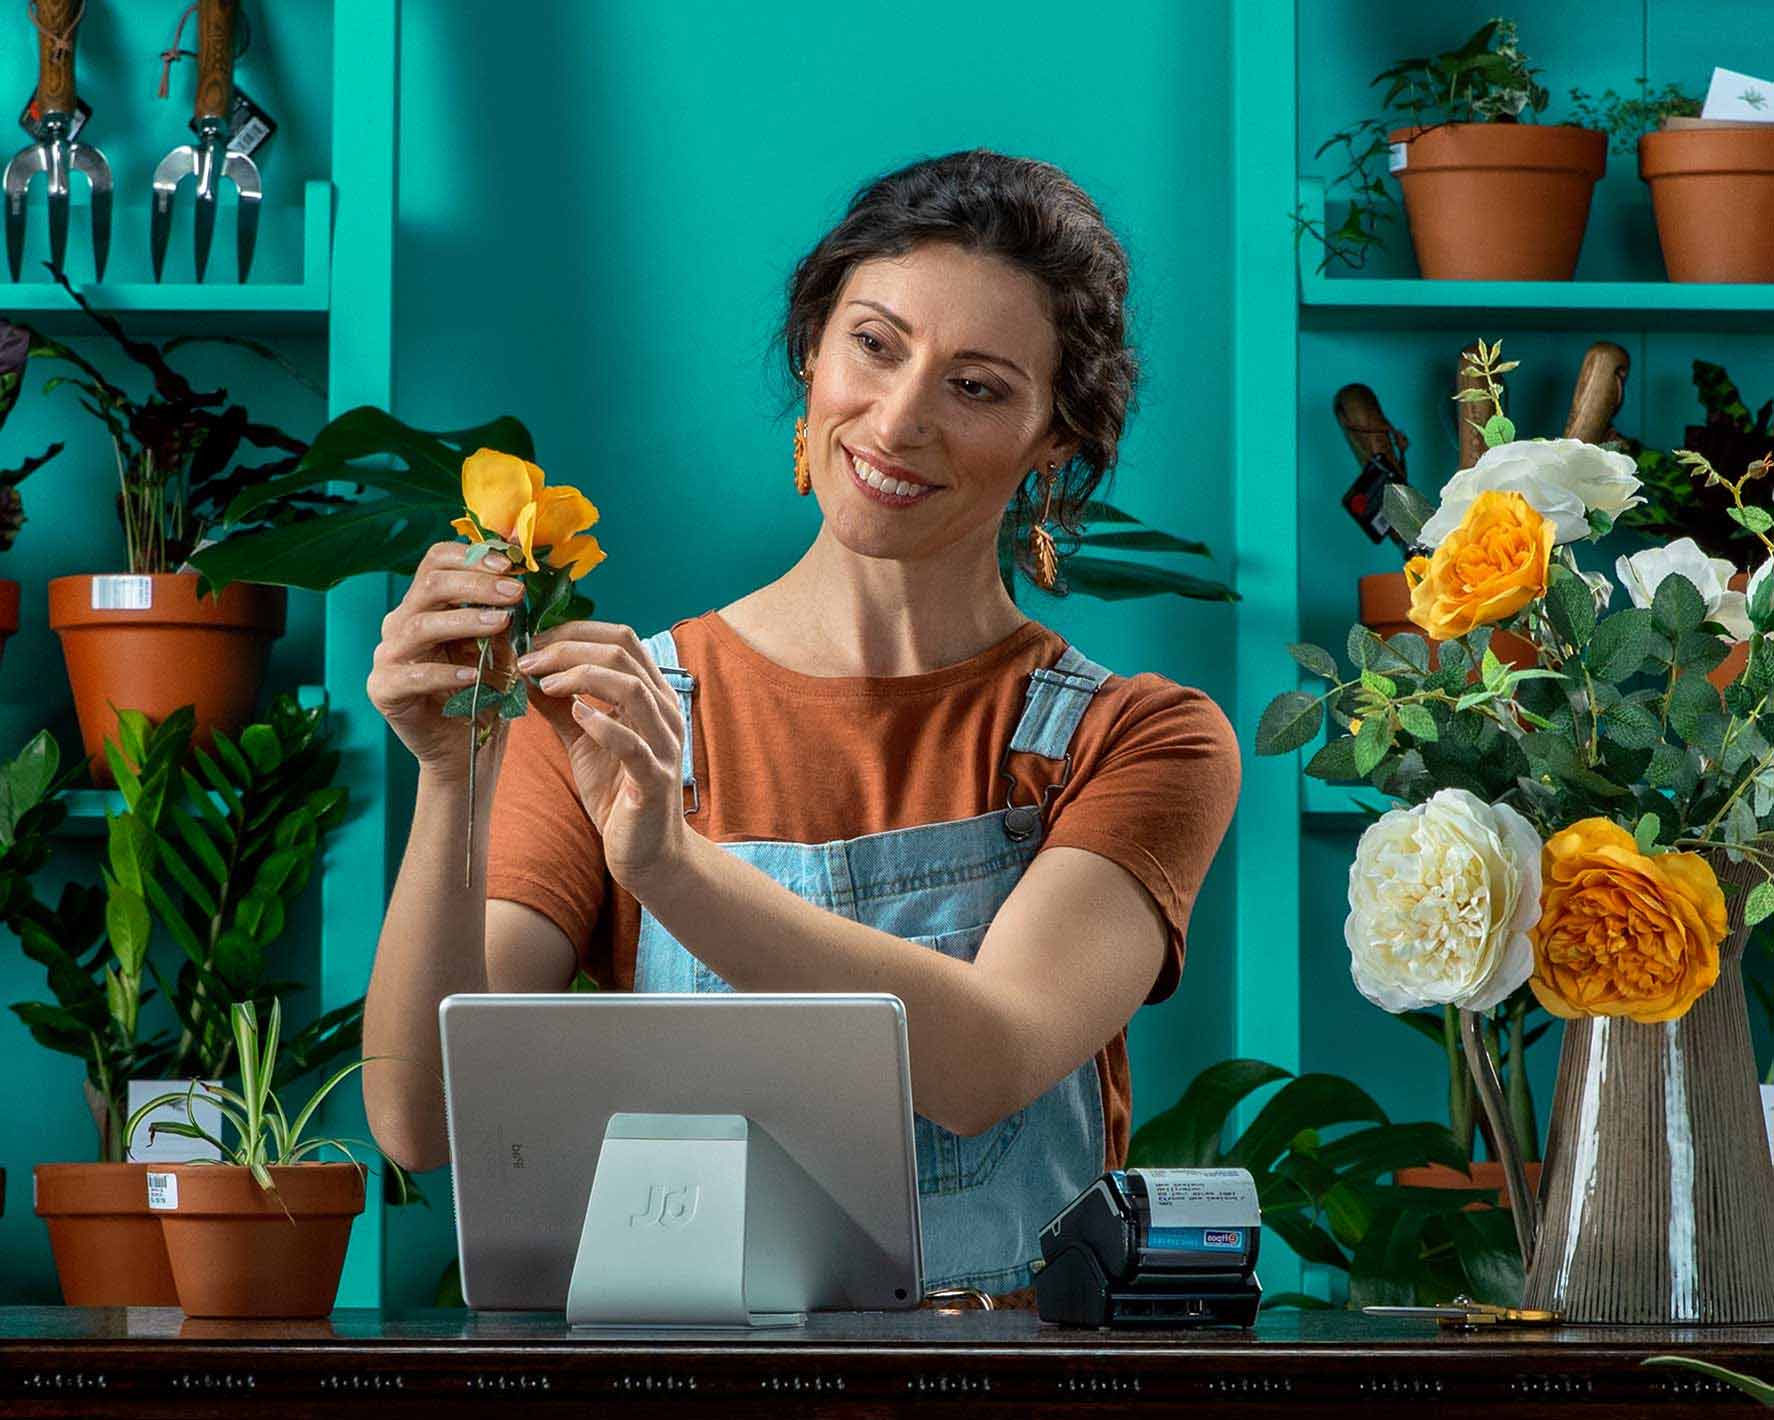 A florist prepares a bunch of flowers with Xero open on a laptop on the counter in front of them.